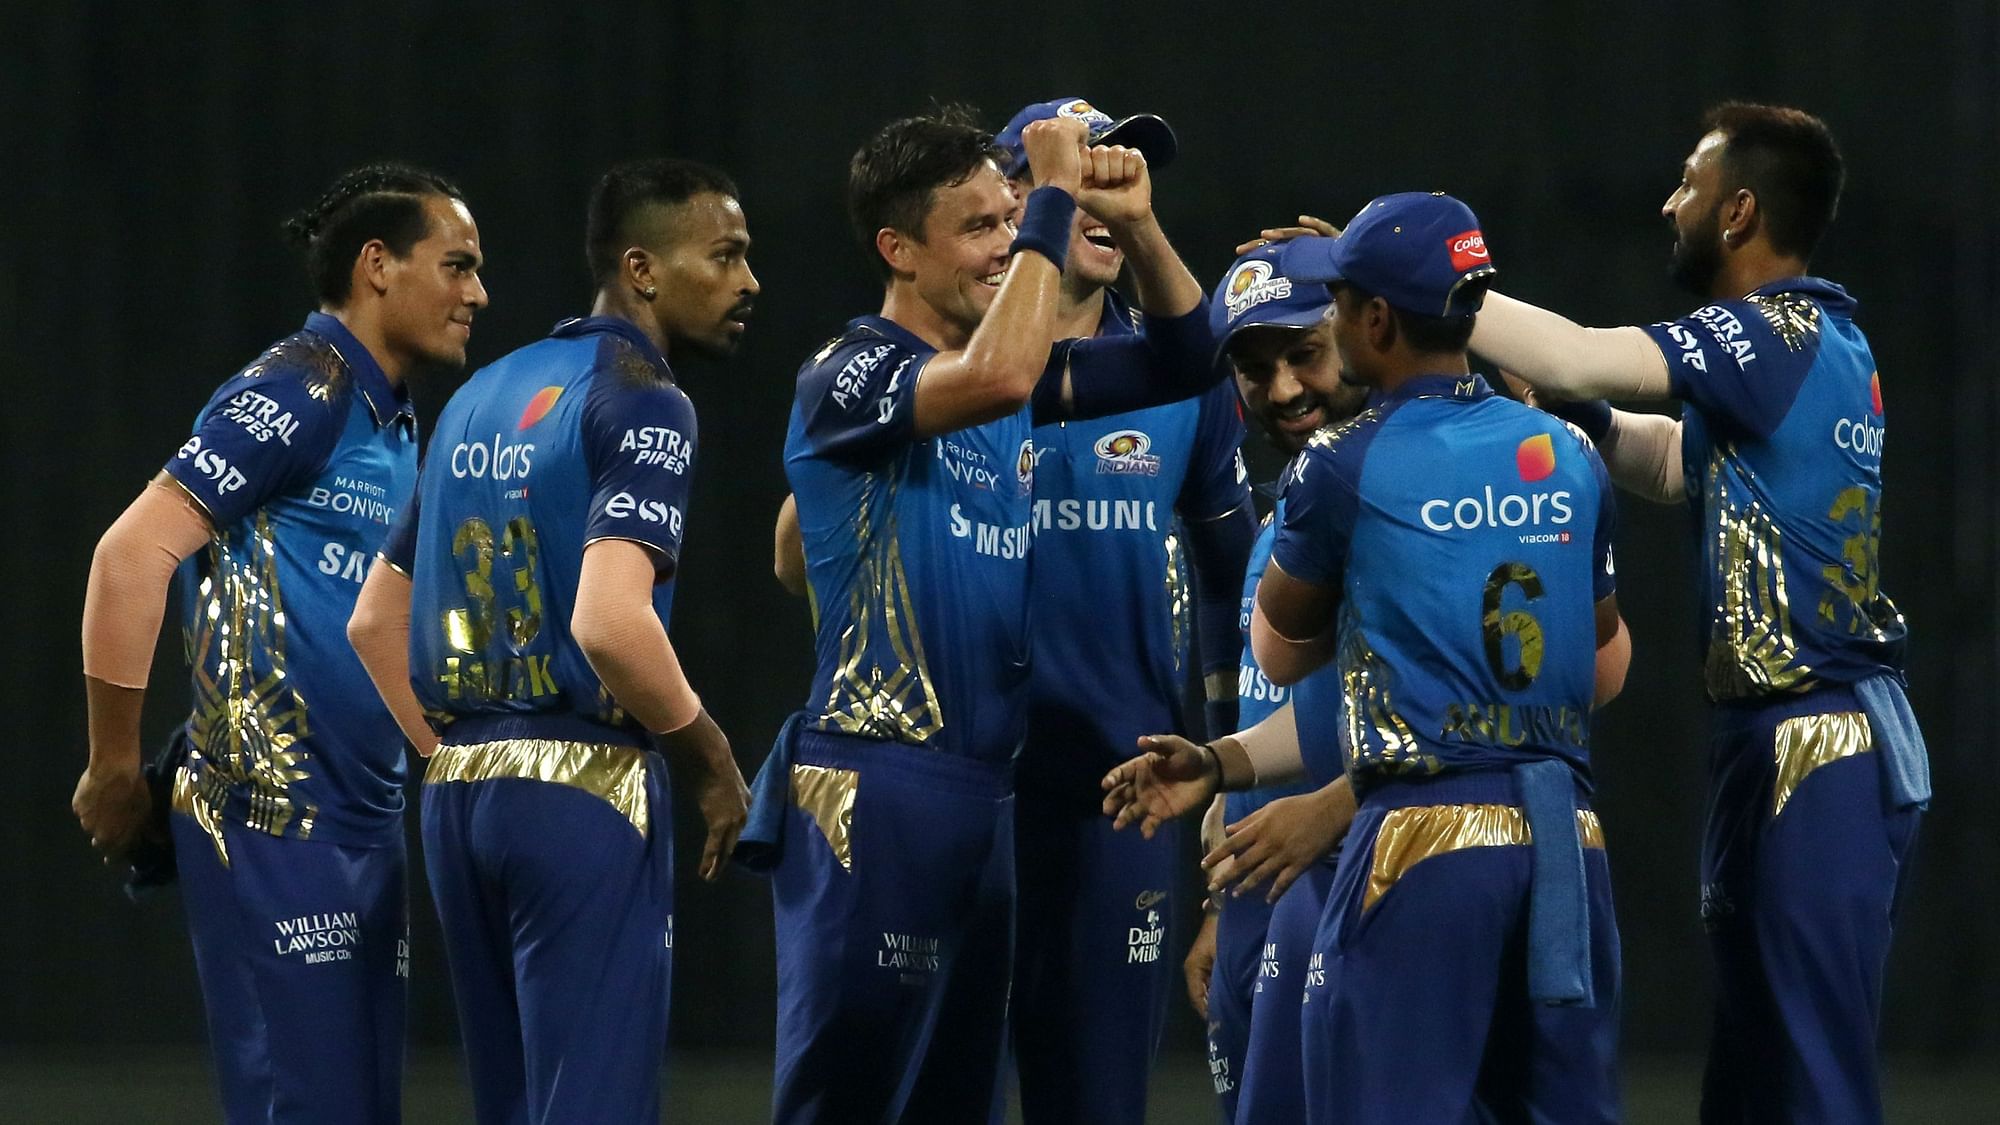 It was another bad day at the office for Rajasthan Royals as they slumped to a 57-run loss against defending champions Mumbai Indians.